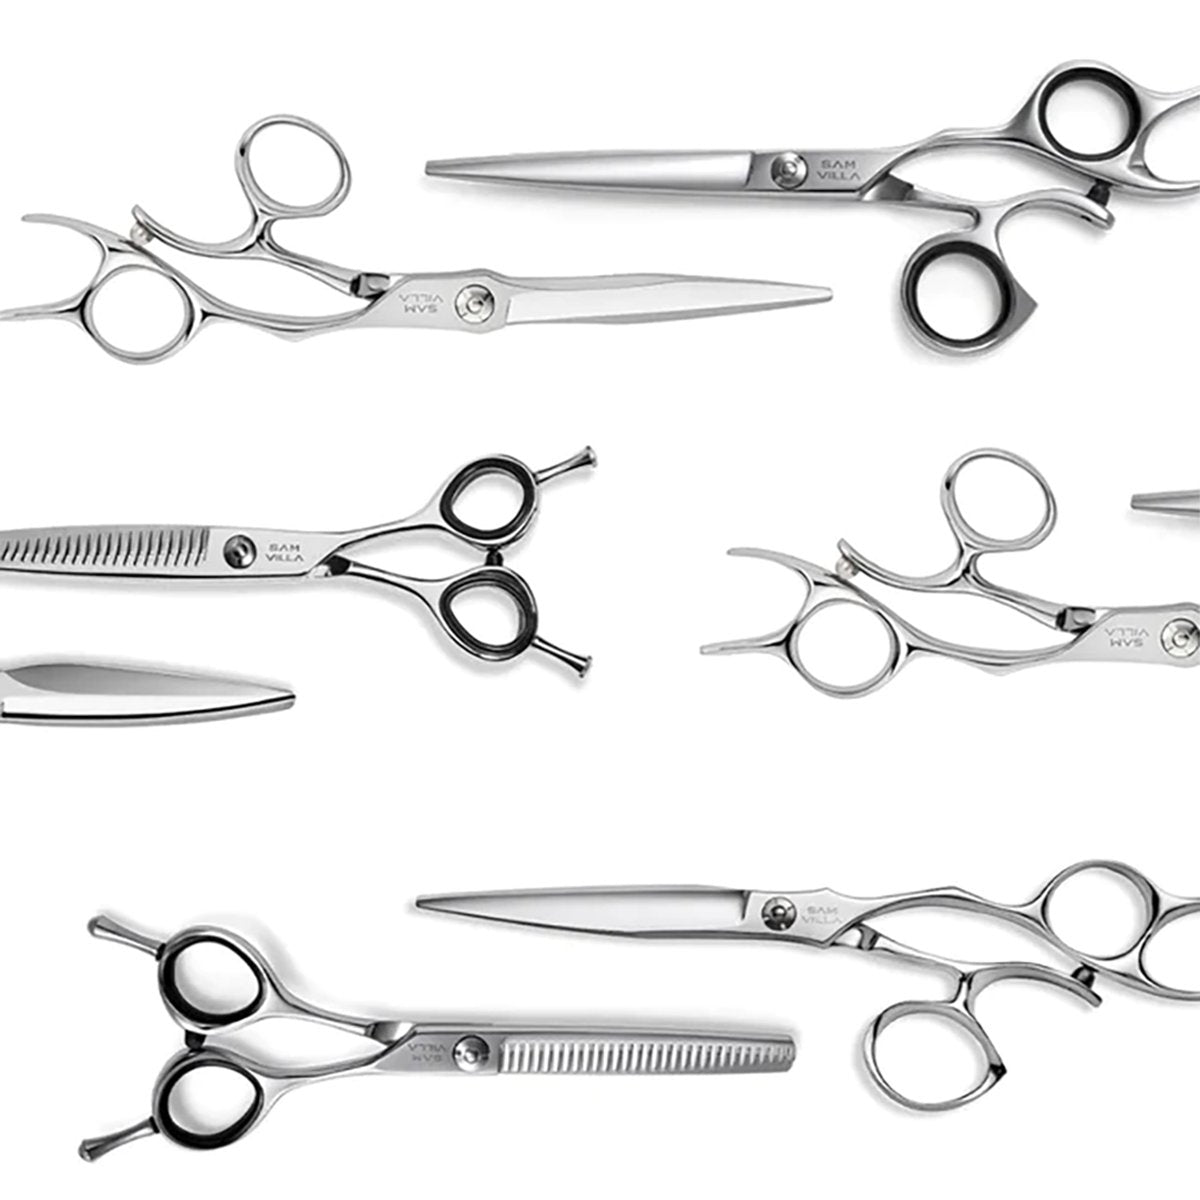 How To Choose The Best Professional Hair Cutting Shears - Full Guide - Sam Villa